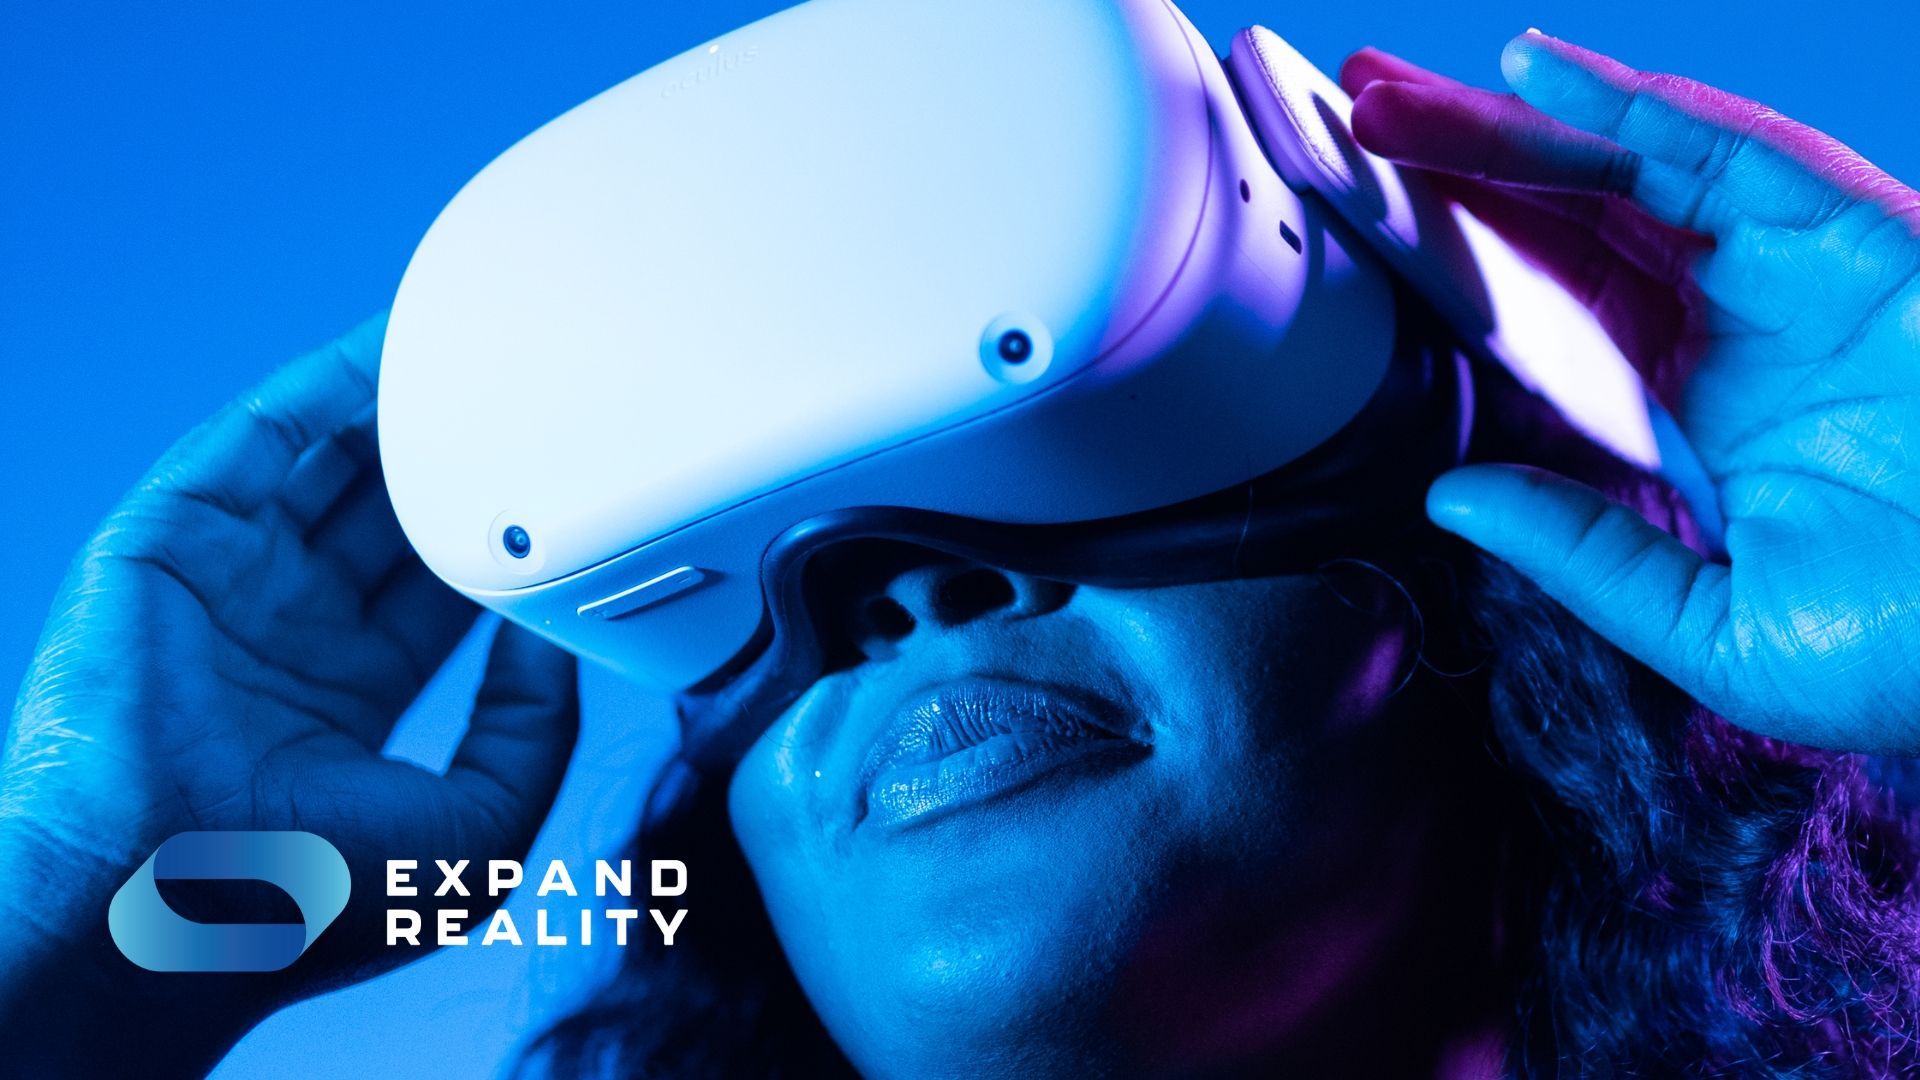 Are we about to enter a new golden age of marketing? Is XR at the forefront? Learn how businesses are harnessing XR to transform the face of marketing.